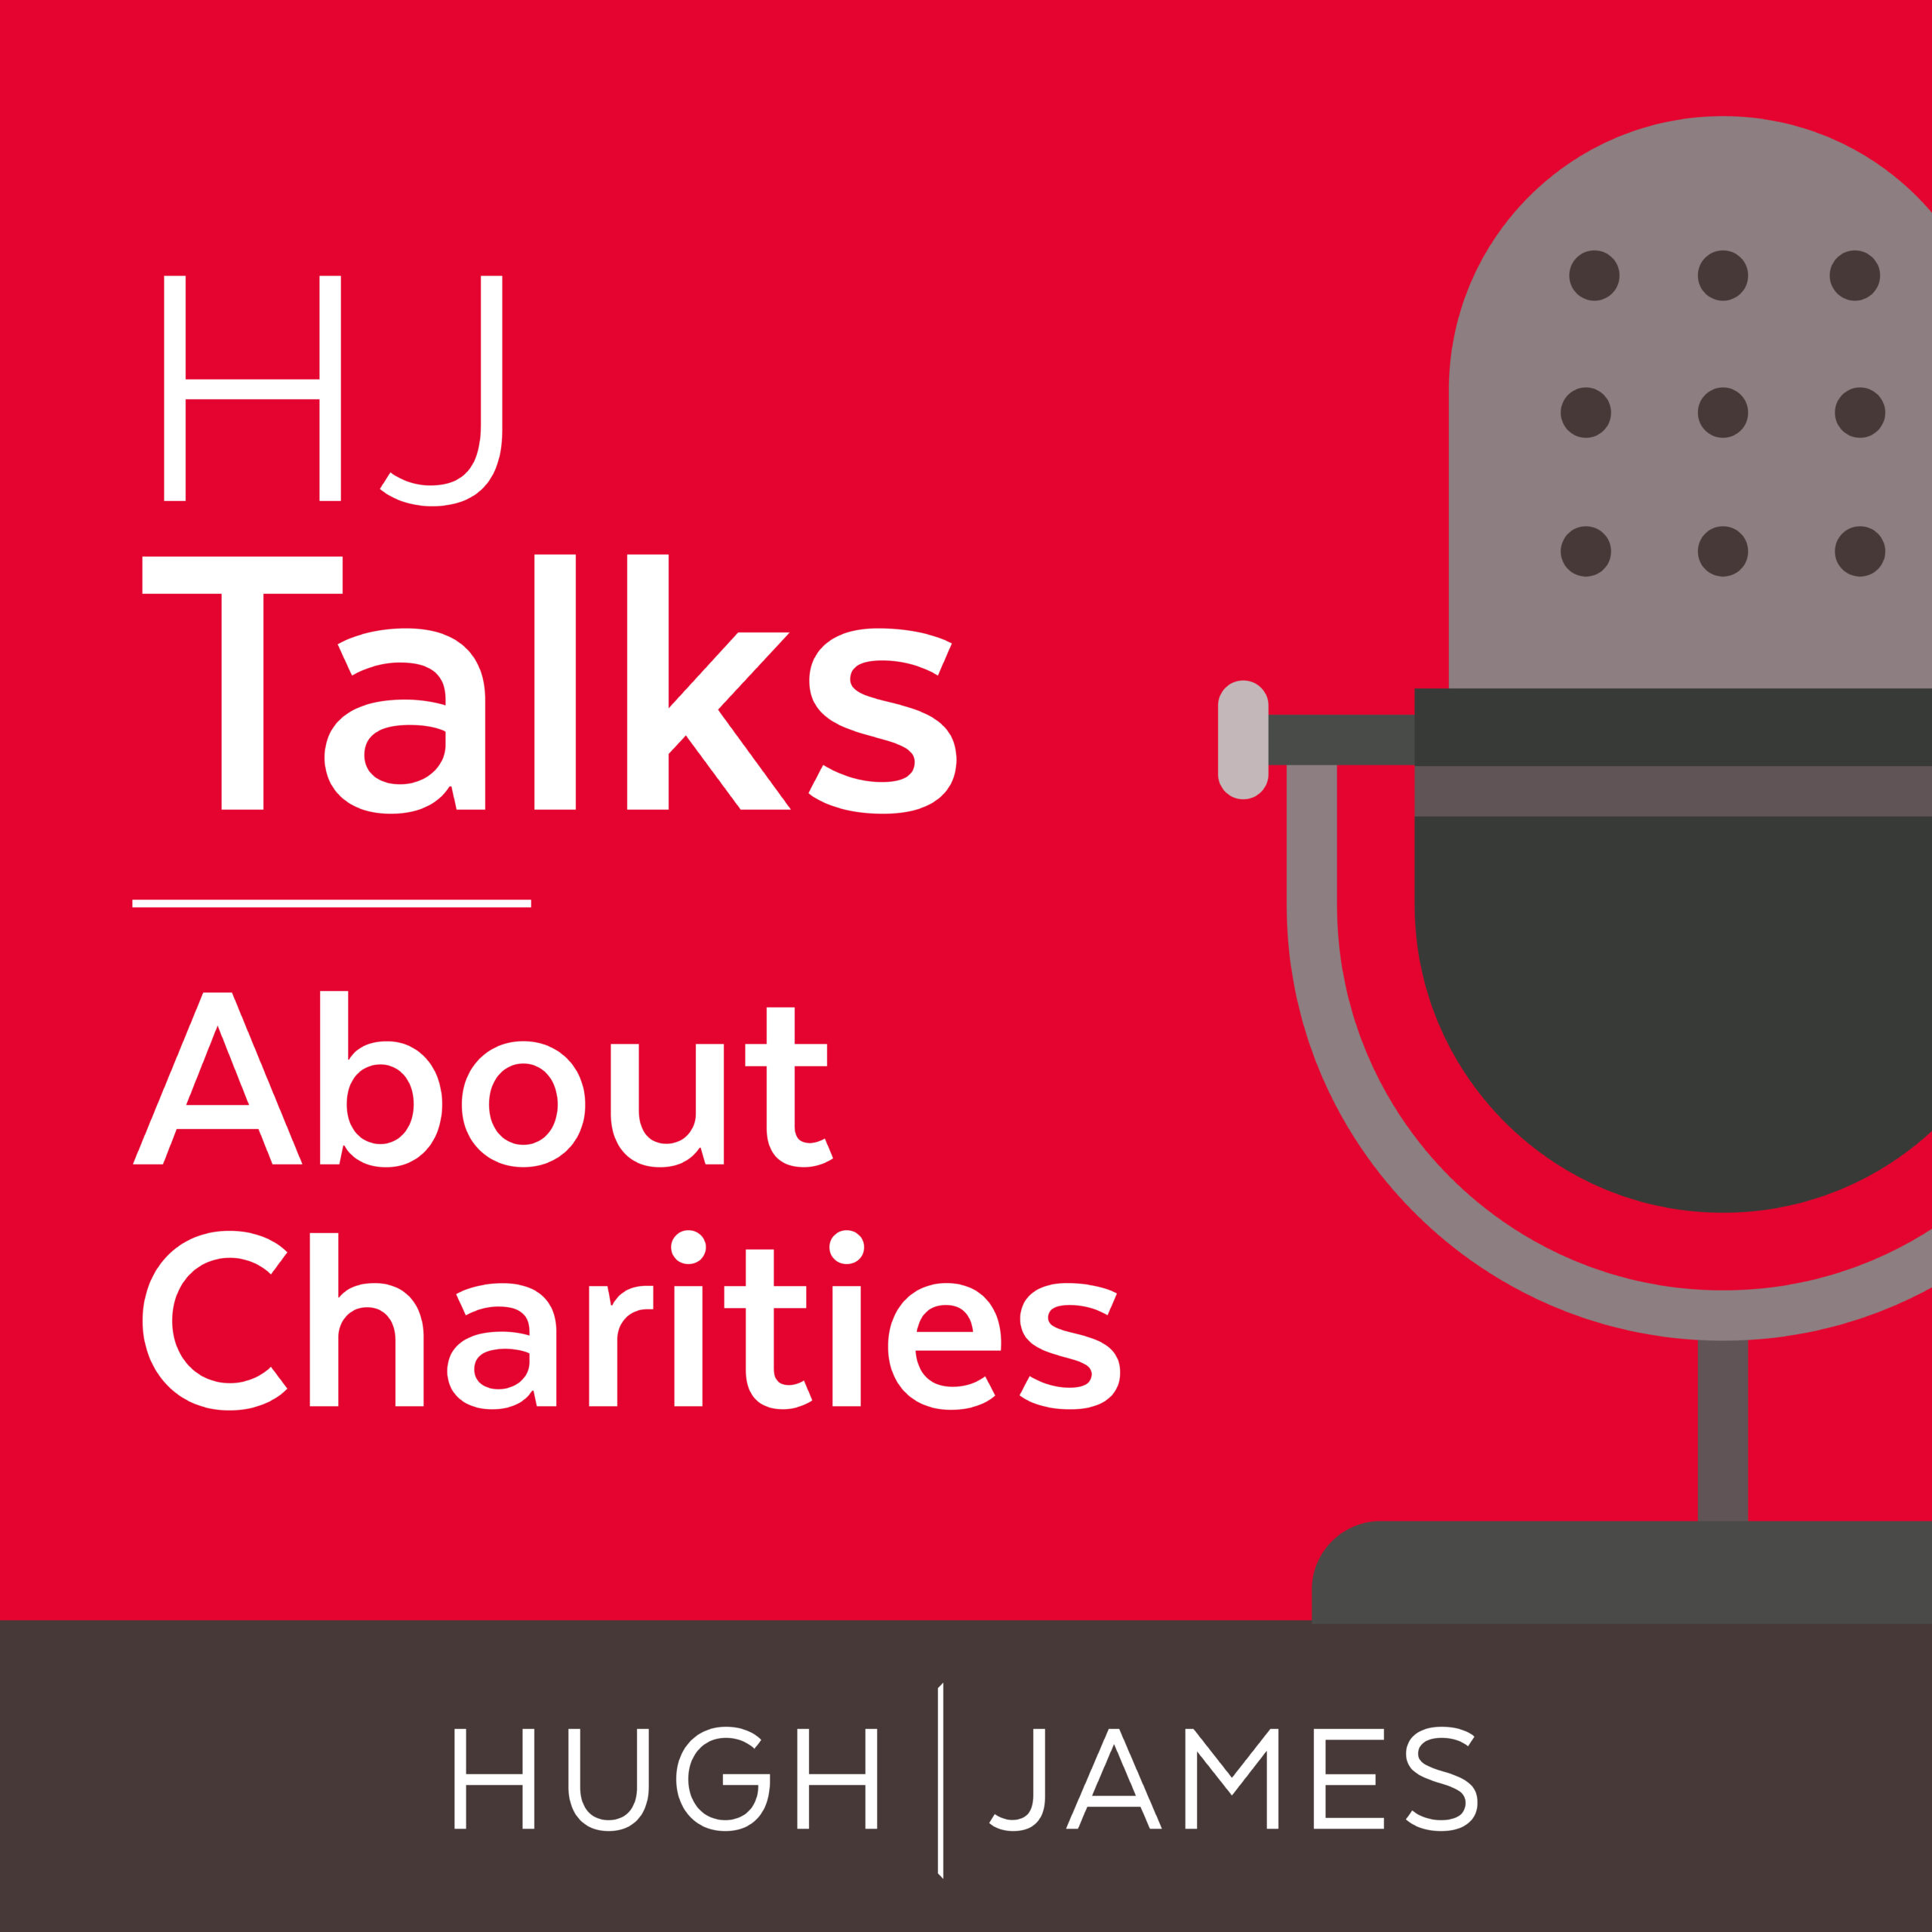 HJ Talks About Charities - dedicated podcast series